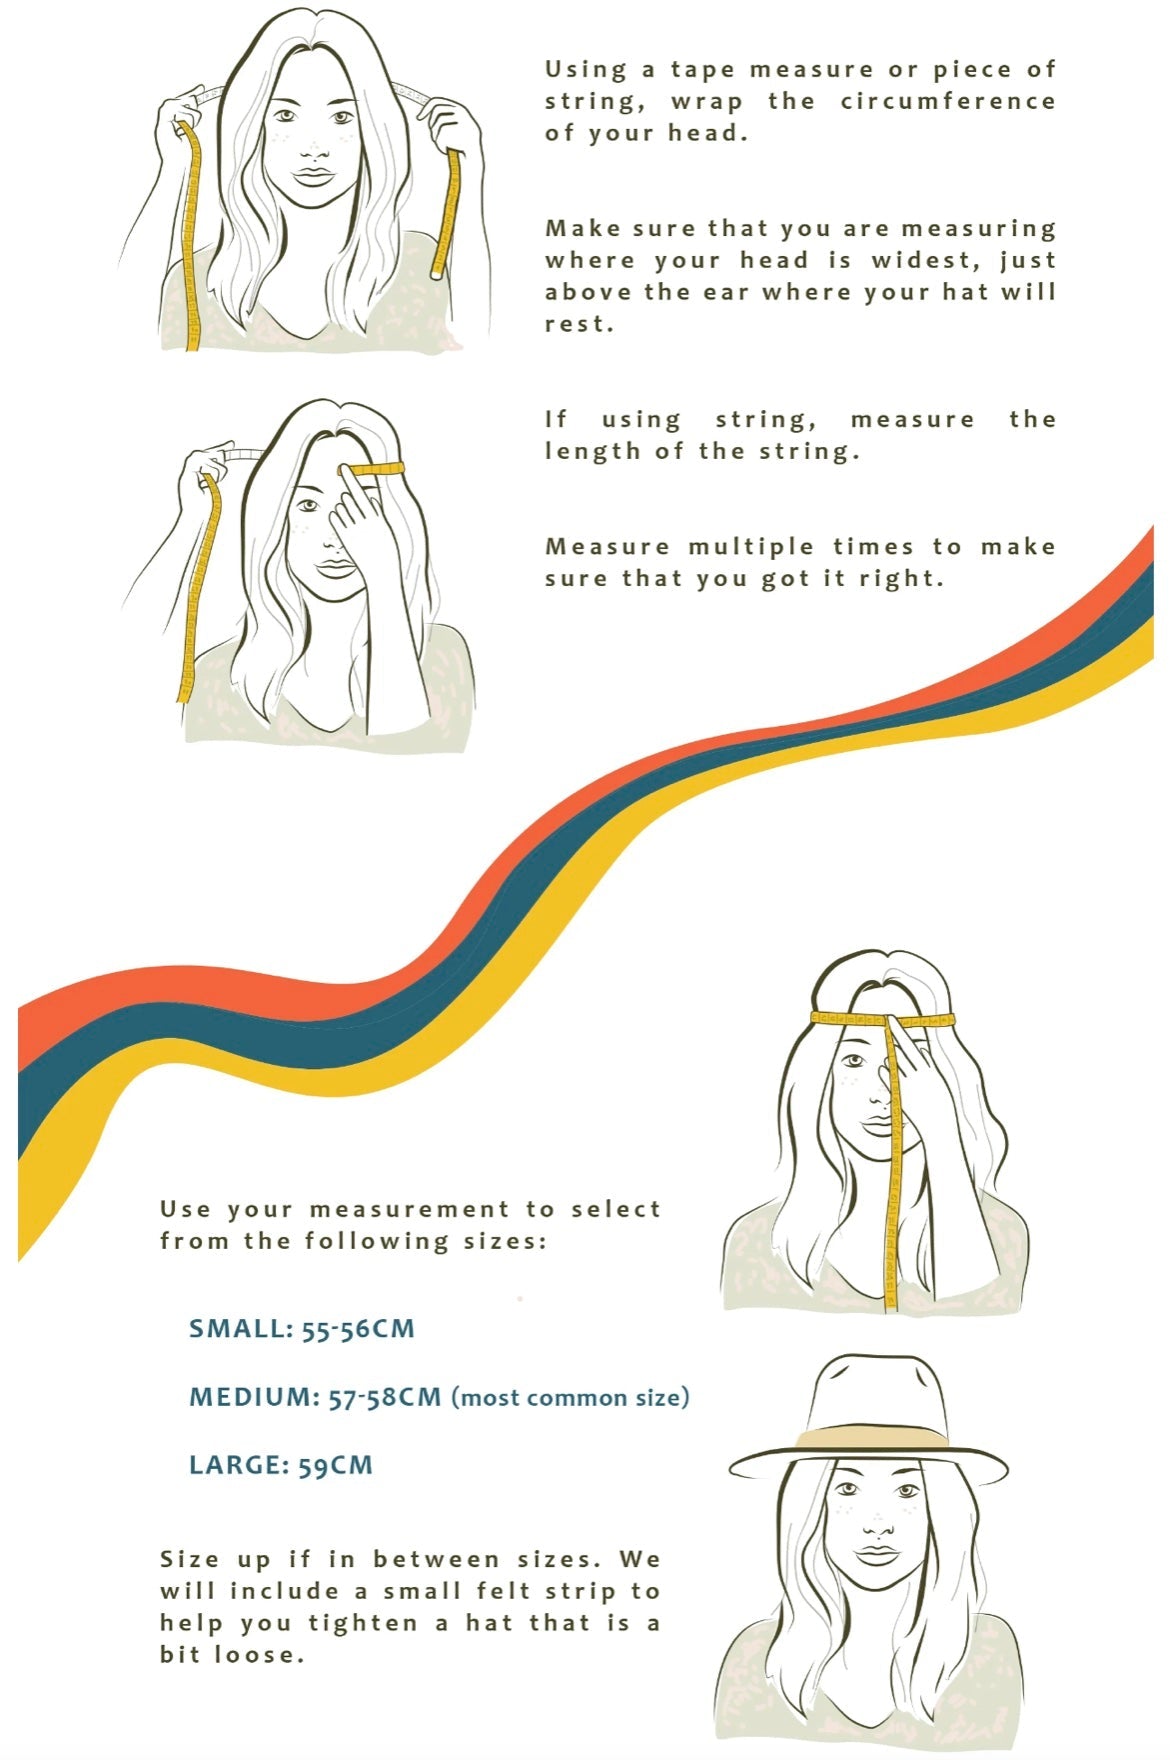 Illustrated guide on how to measure your head for a hat size.